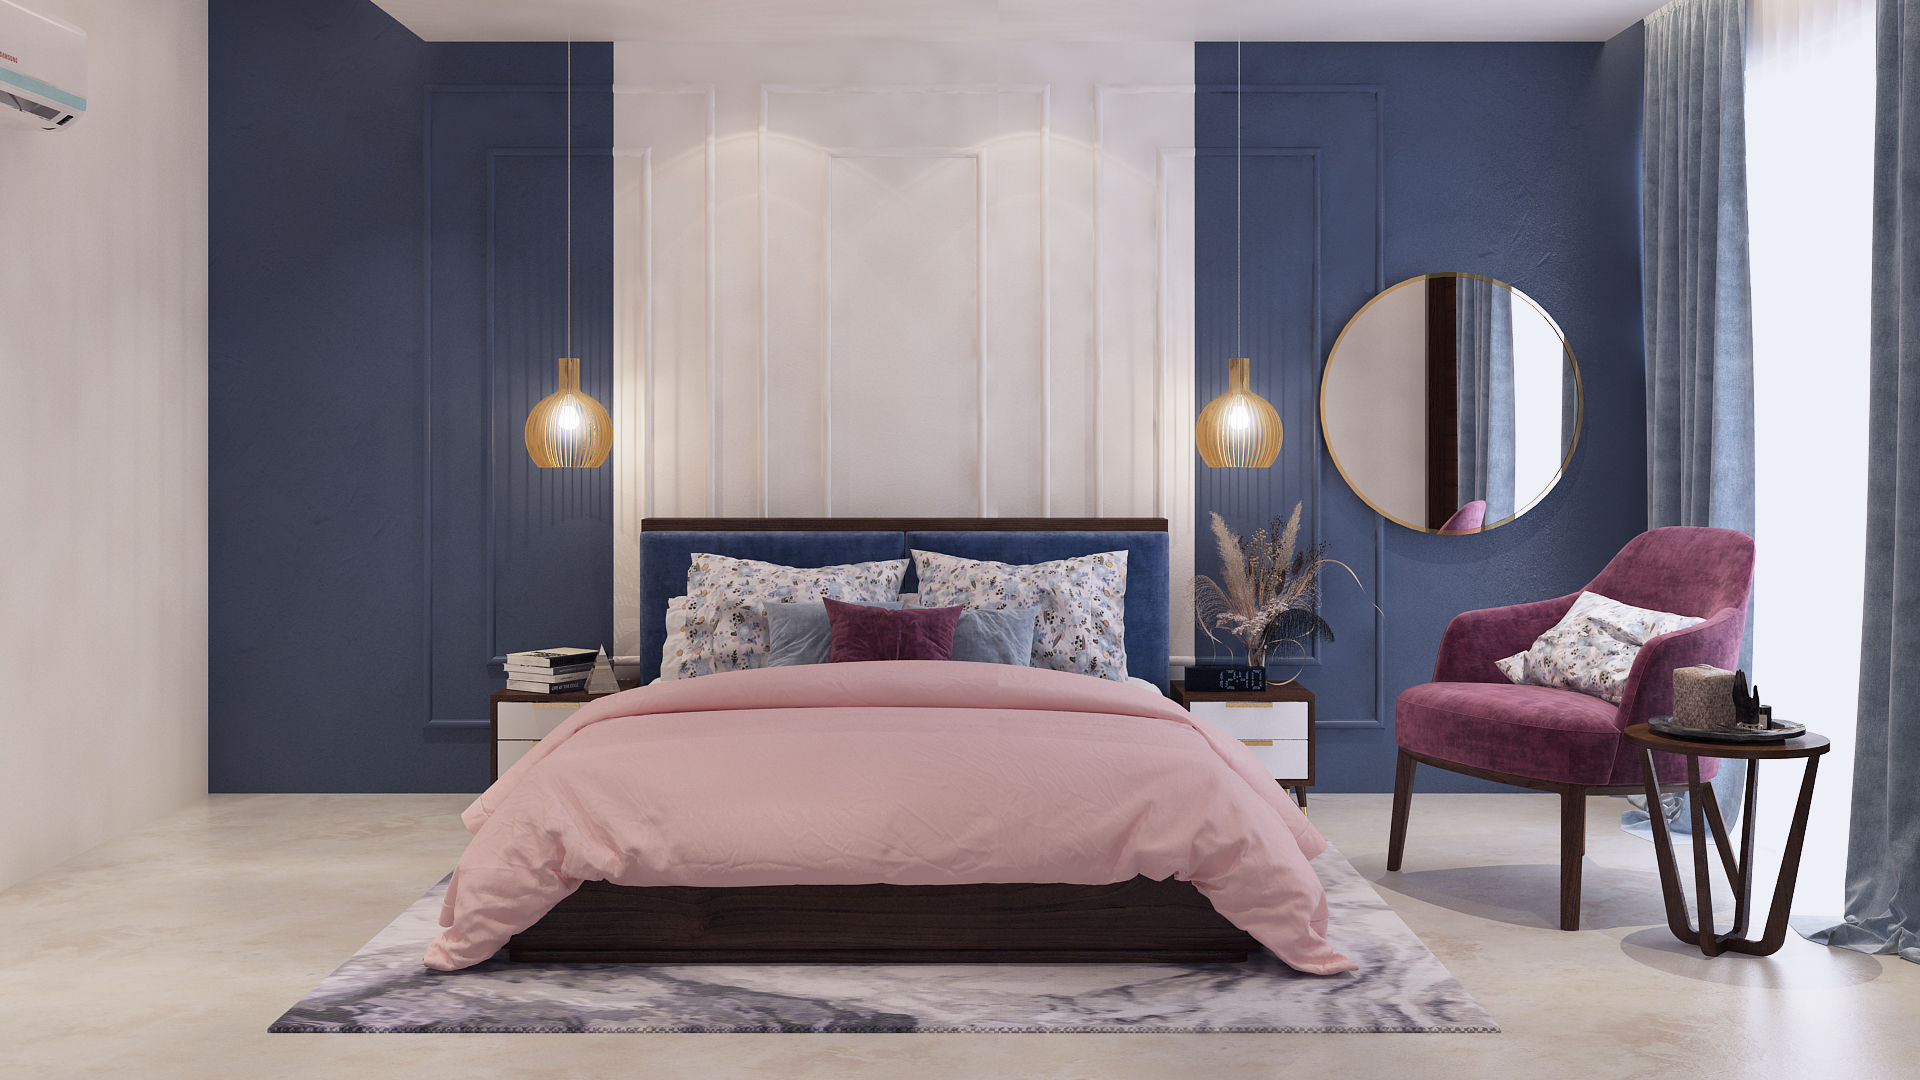 Master bedroom in celestial blue and white homify Eclectic style bedroom bedroom interiors, master bedroom interiors , bed designs, accent wall designs